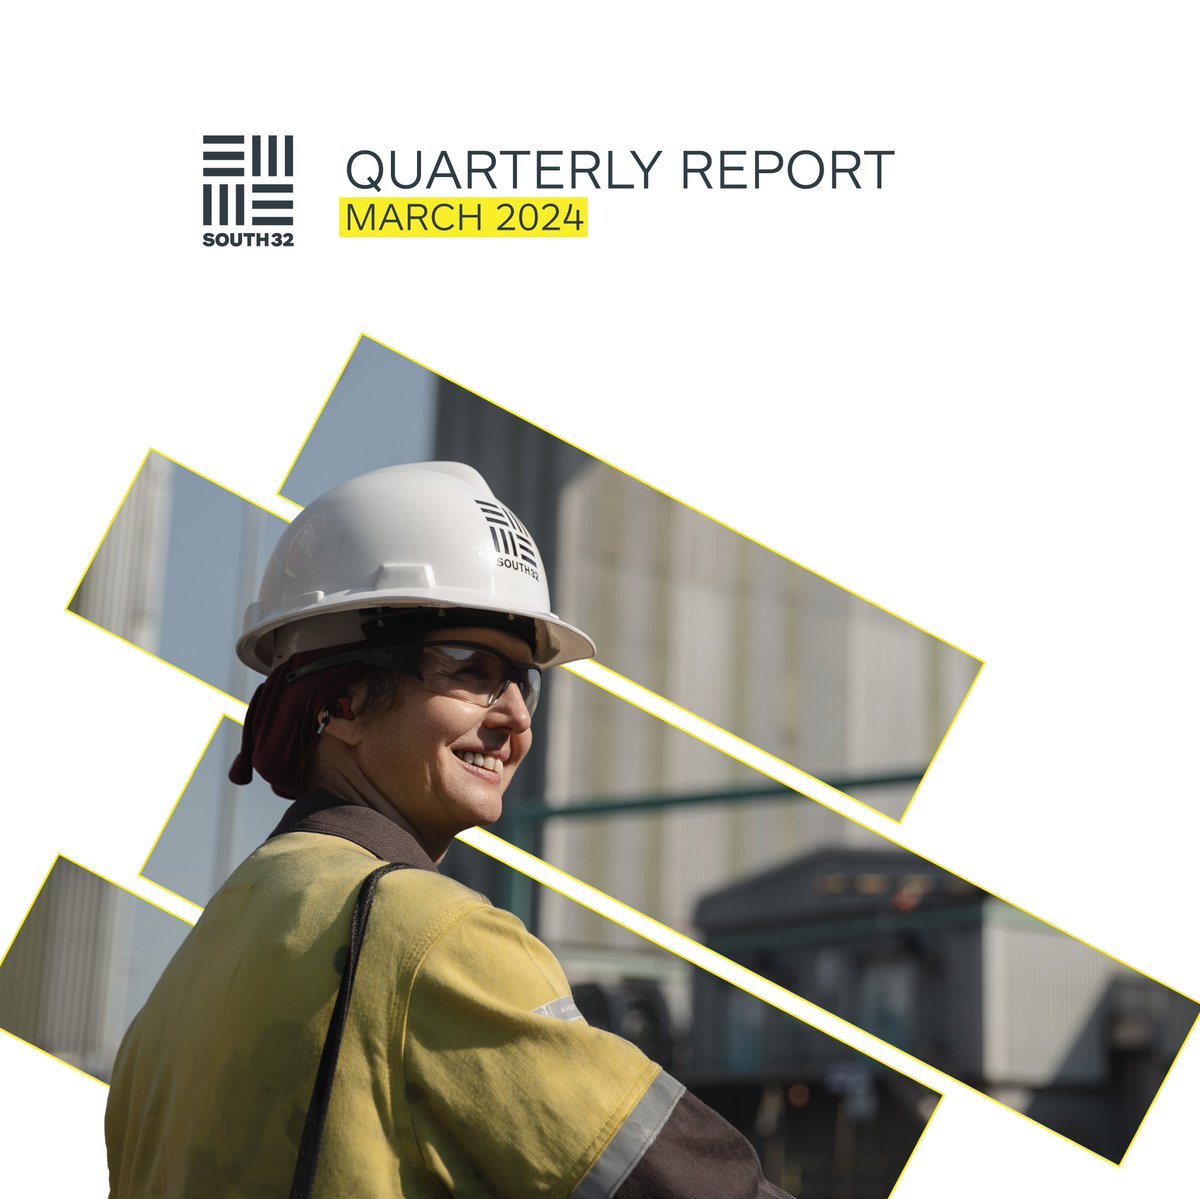 Today we released our Quarterly Report for March 2024. During the period we delivered improved operating results and achieved significant milestones aligned with our strategy to transform our portfolio. Read more and see the report: south32.net/news-media/lat…